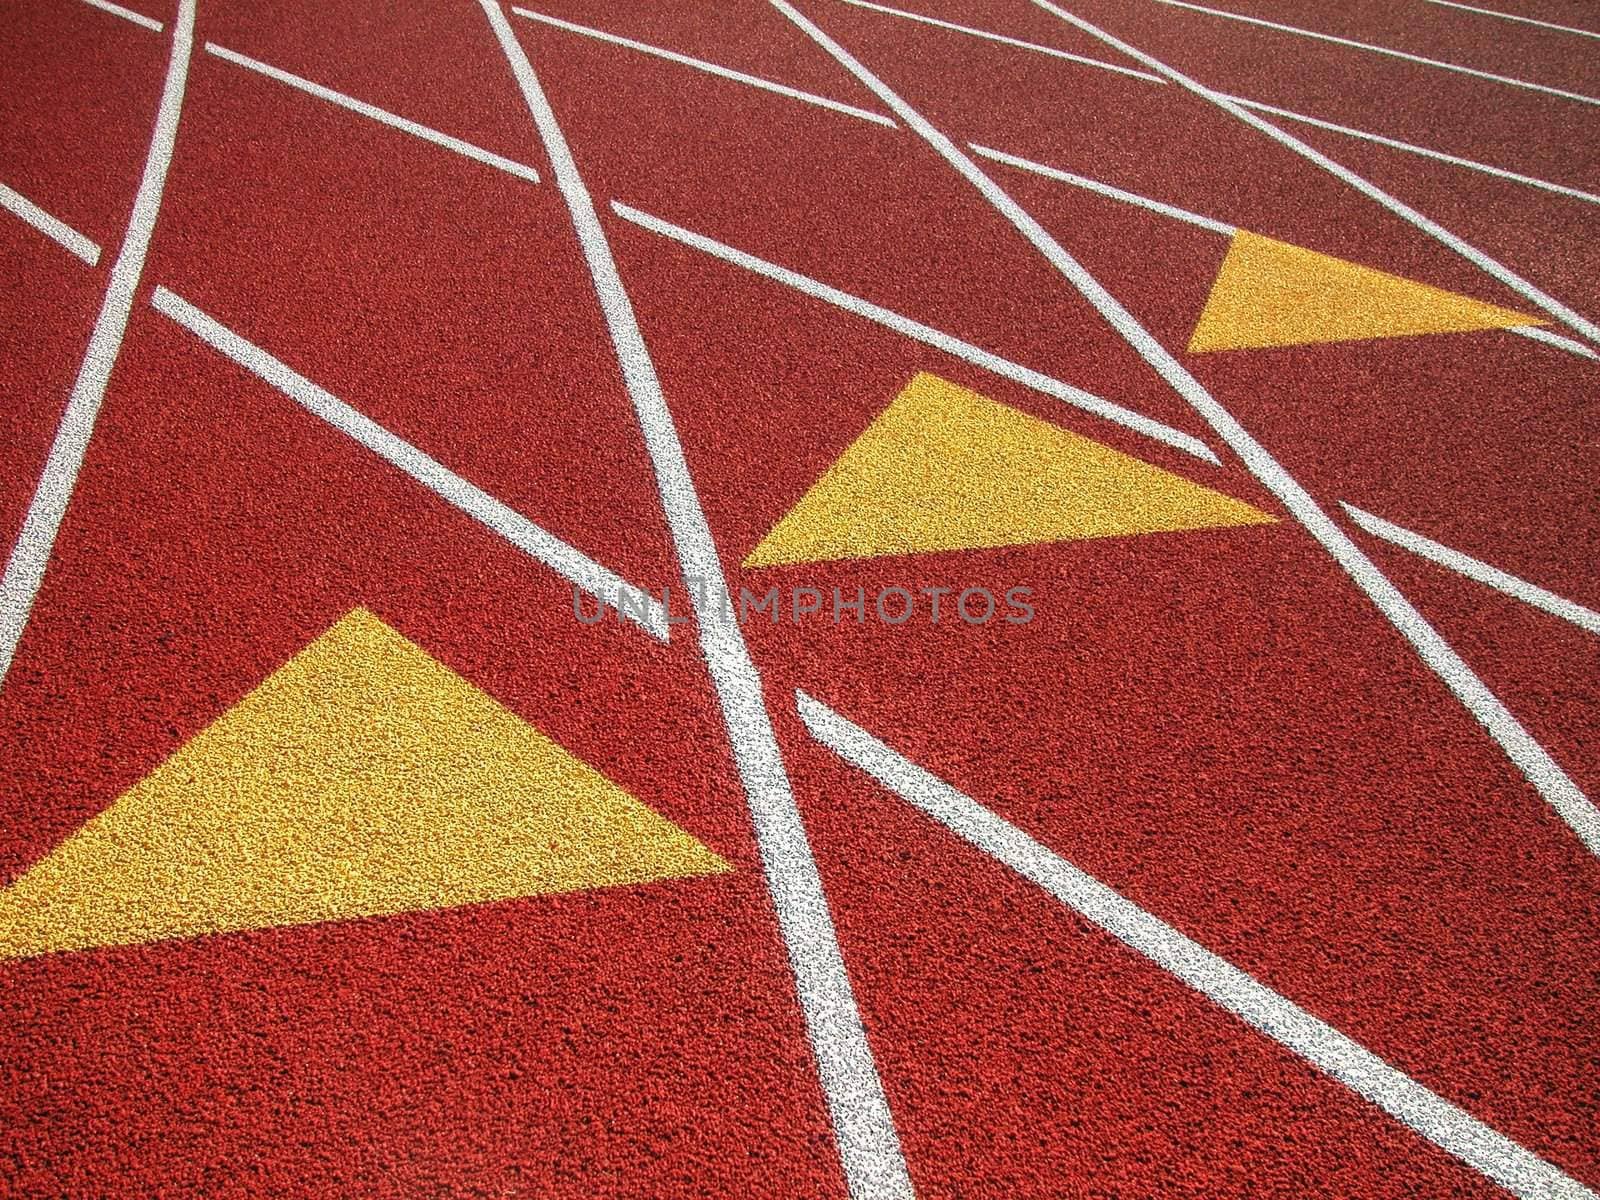 Running Track Lanes by pixelsnap